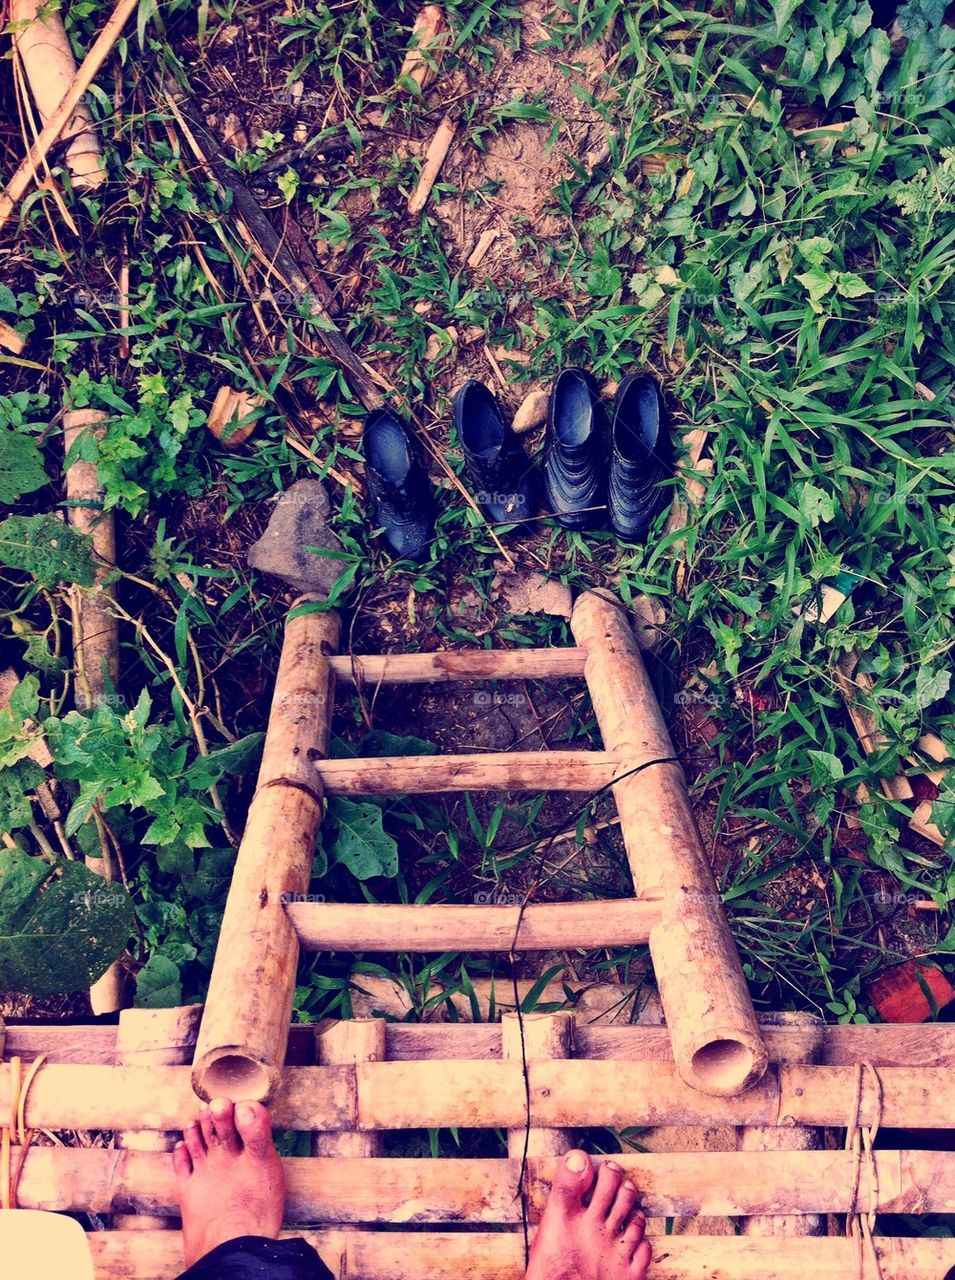 Pair of shoes under the ladder